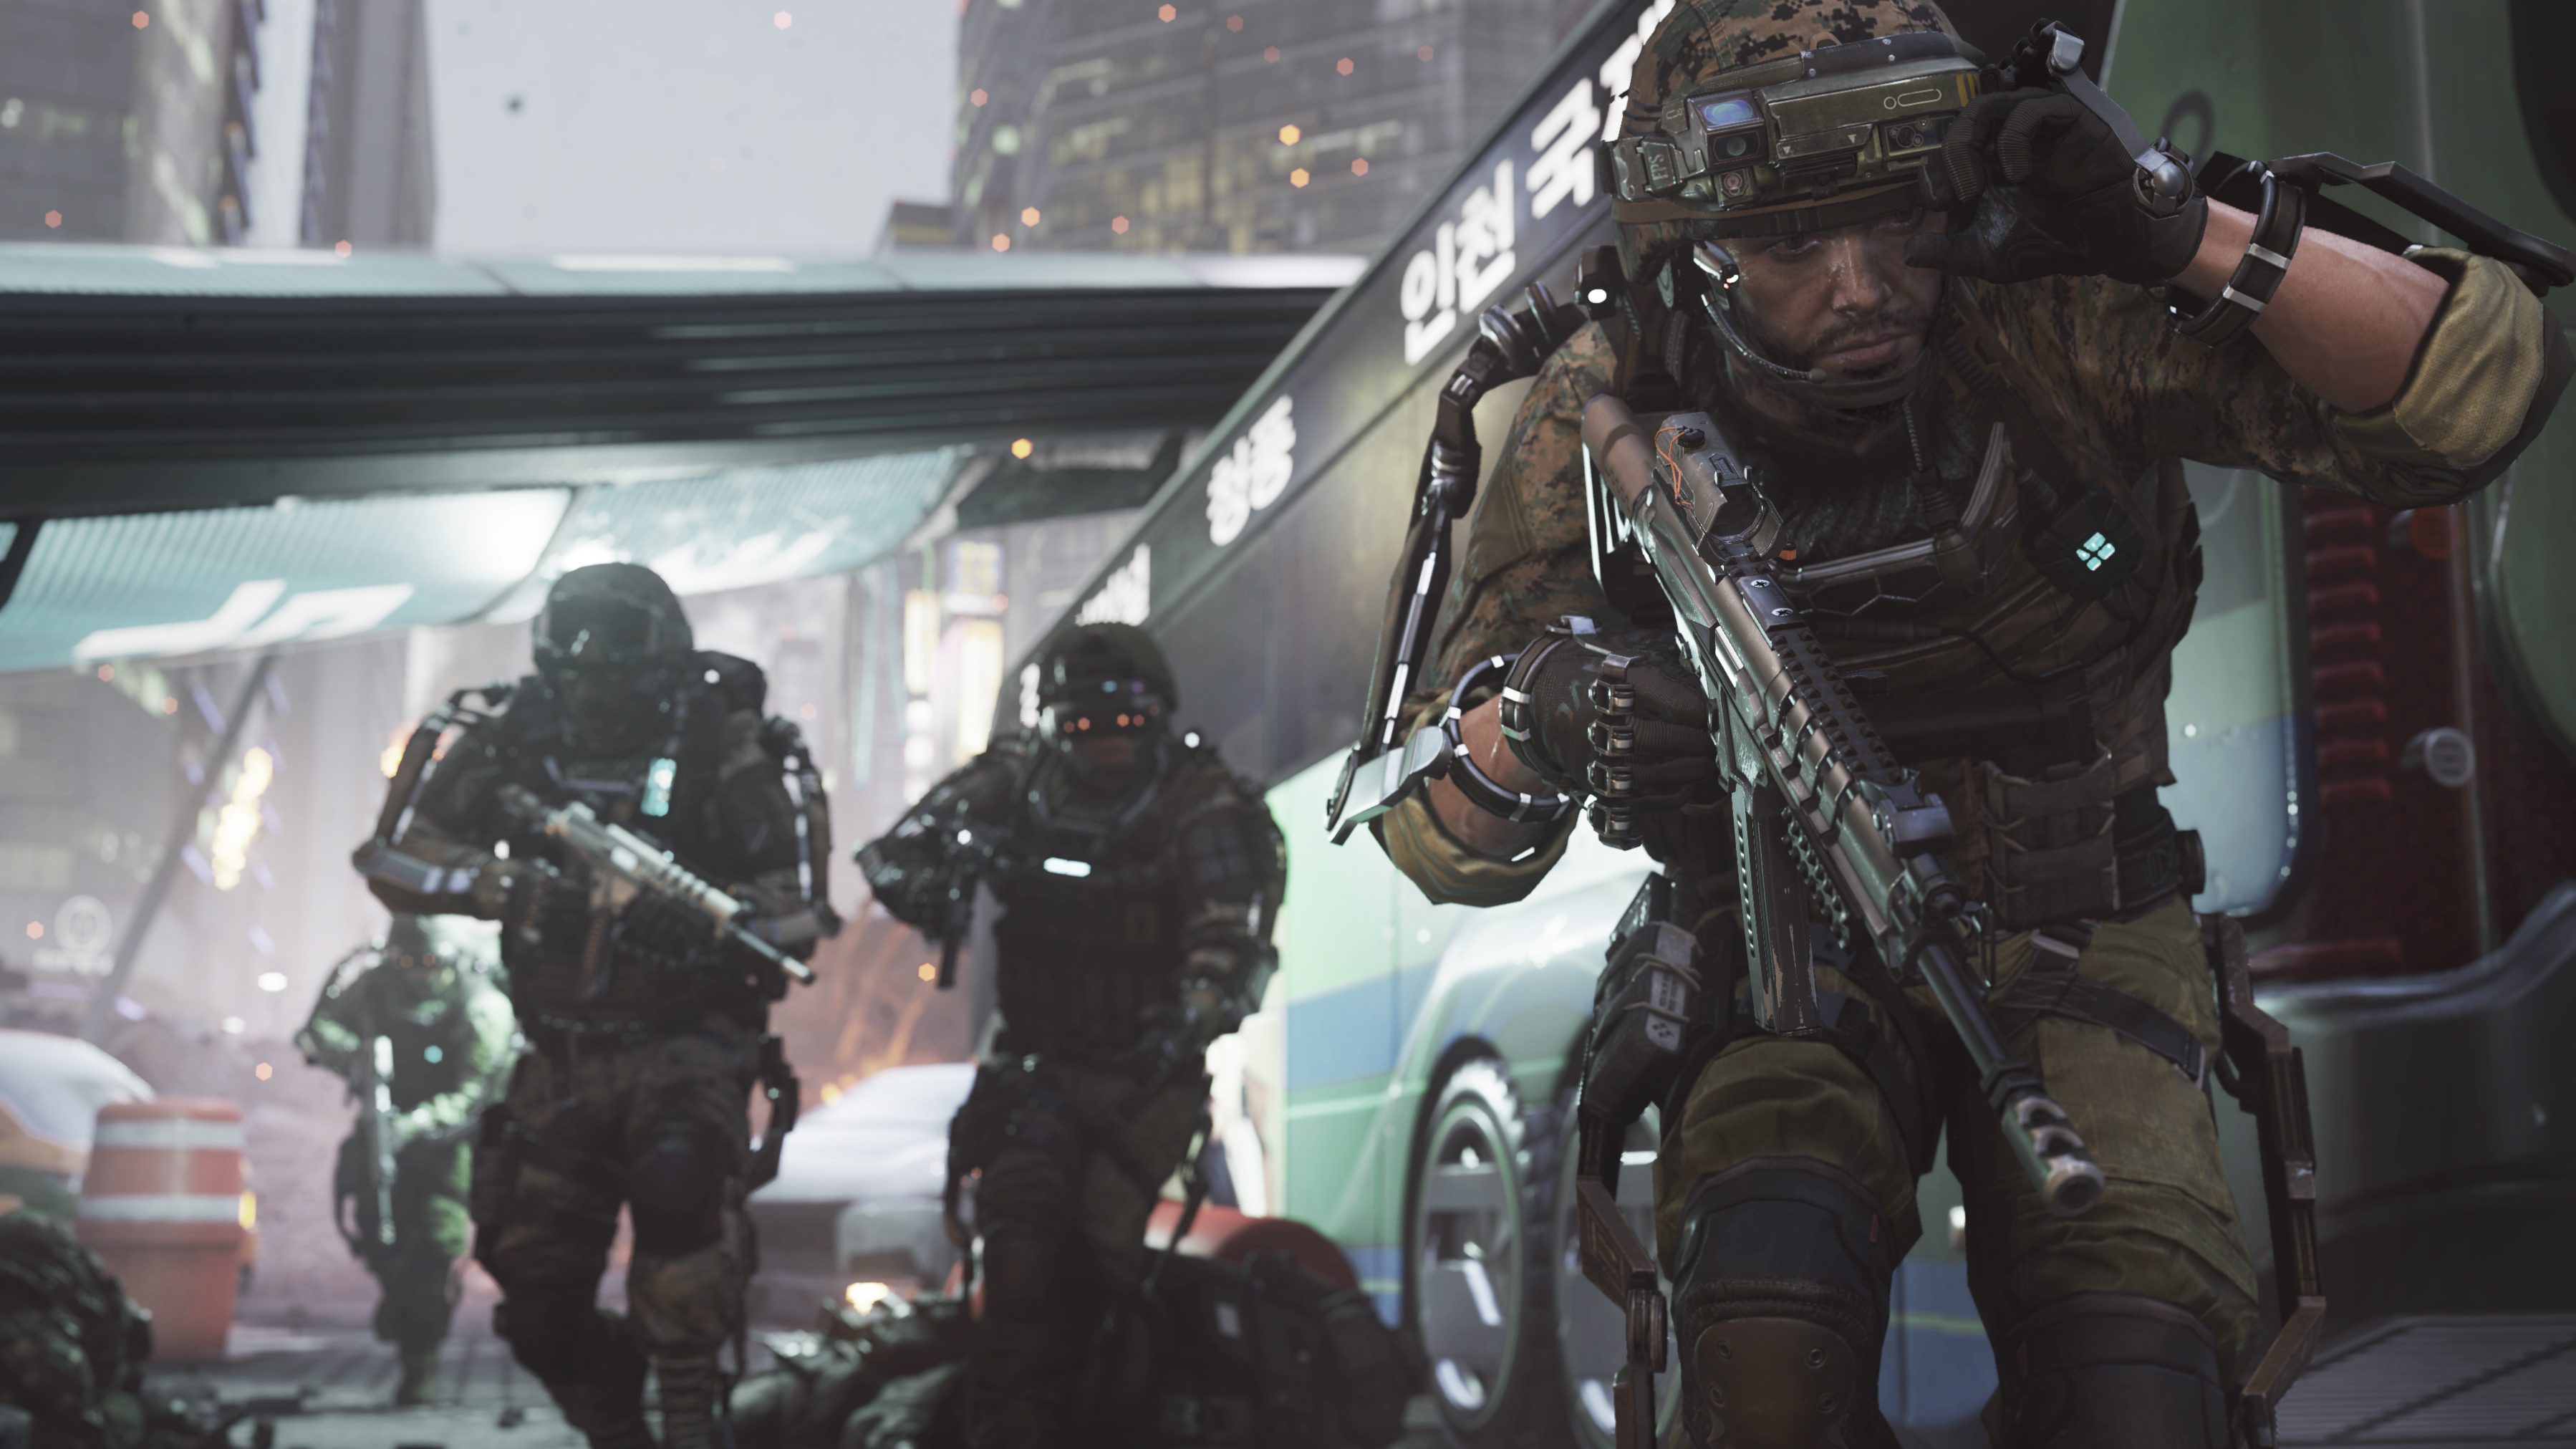 Advanced Warfare Walkthrough - Mission 1 - INDUCTION (Call of Duty Campaign  Let's Play) 